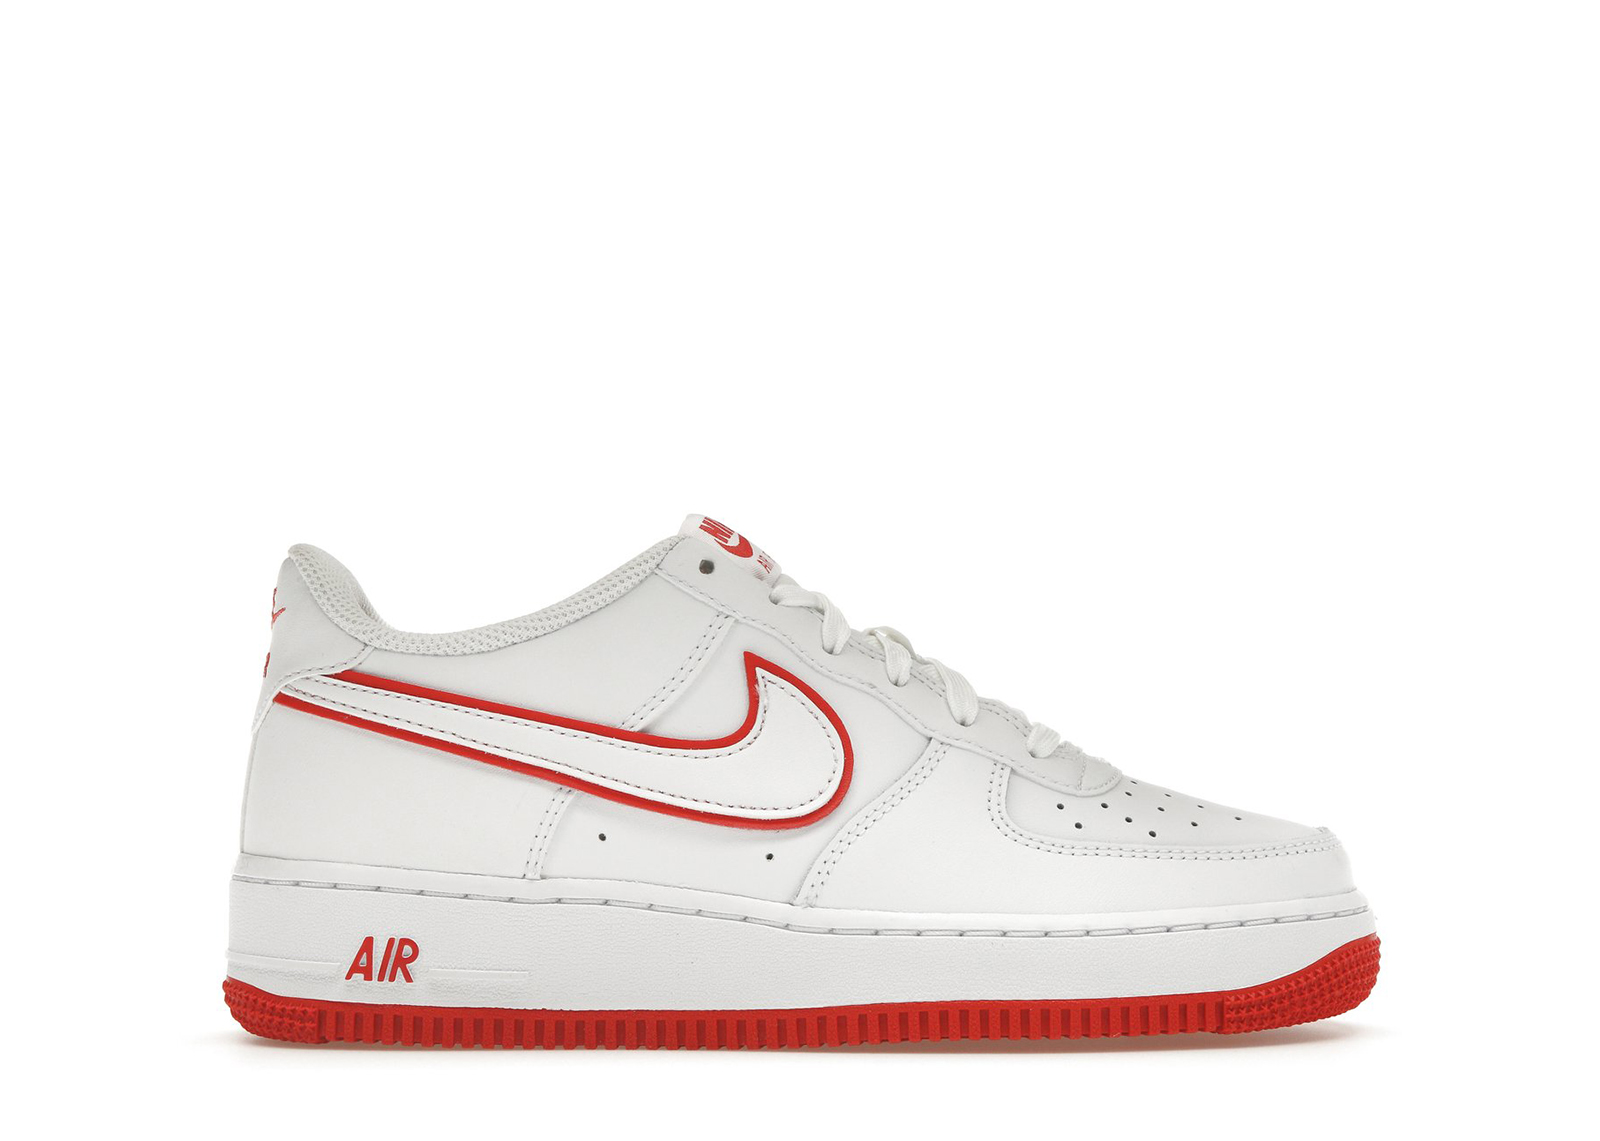 Nike Air Force 1 Low White Picante Red (GS) キッズ - DV7762-101 - JP